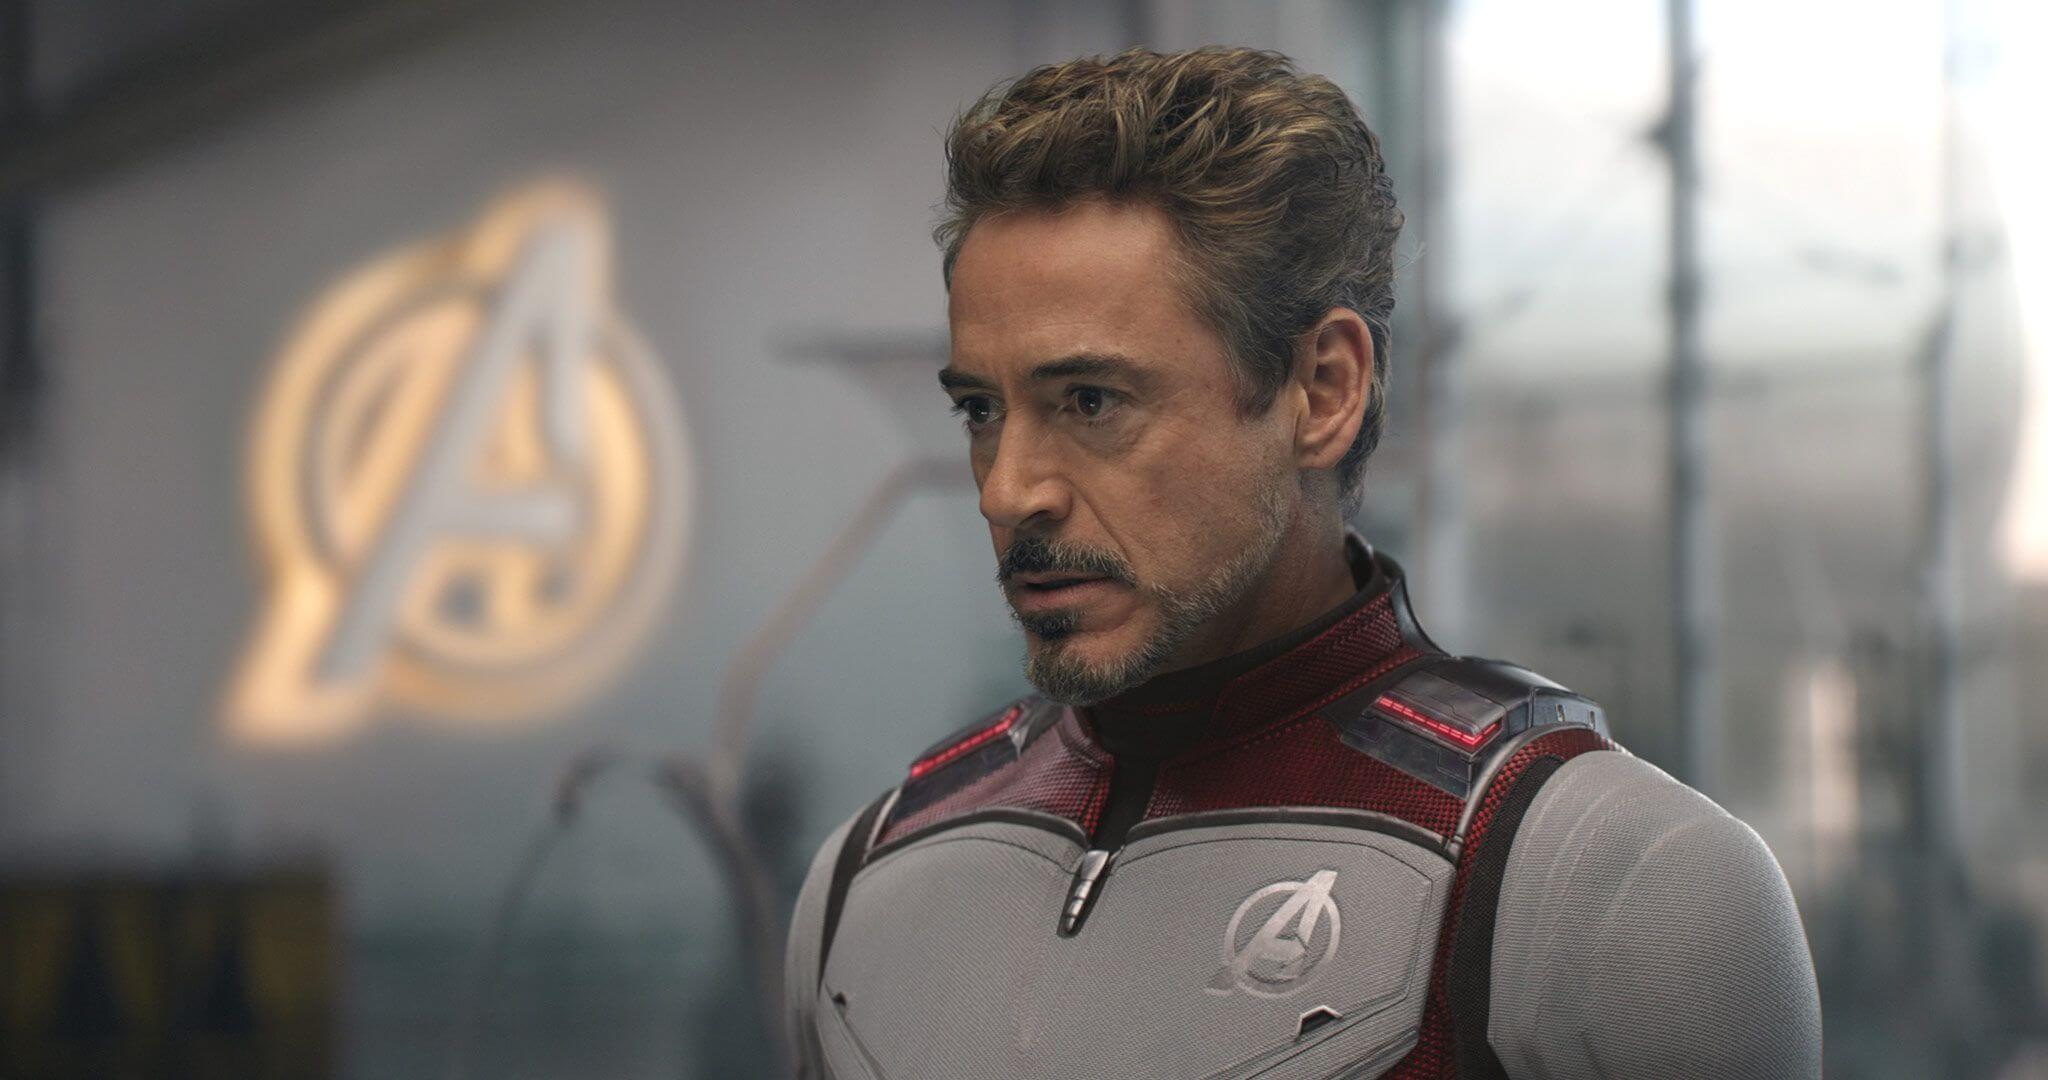 Robert Downey Jr. to Voice Iron Man in ‘What If’ Series